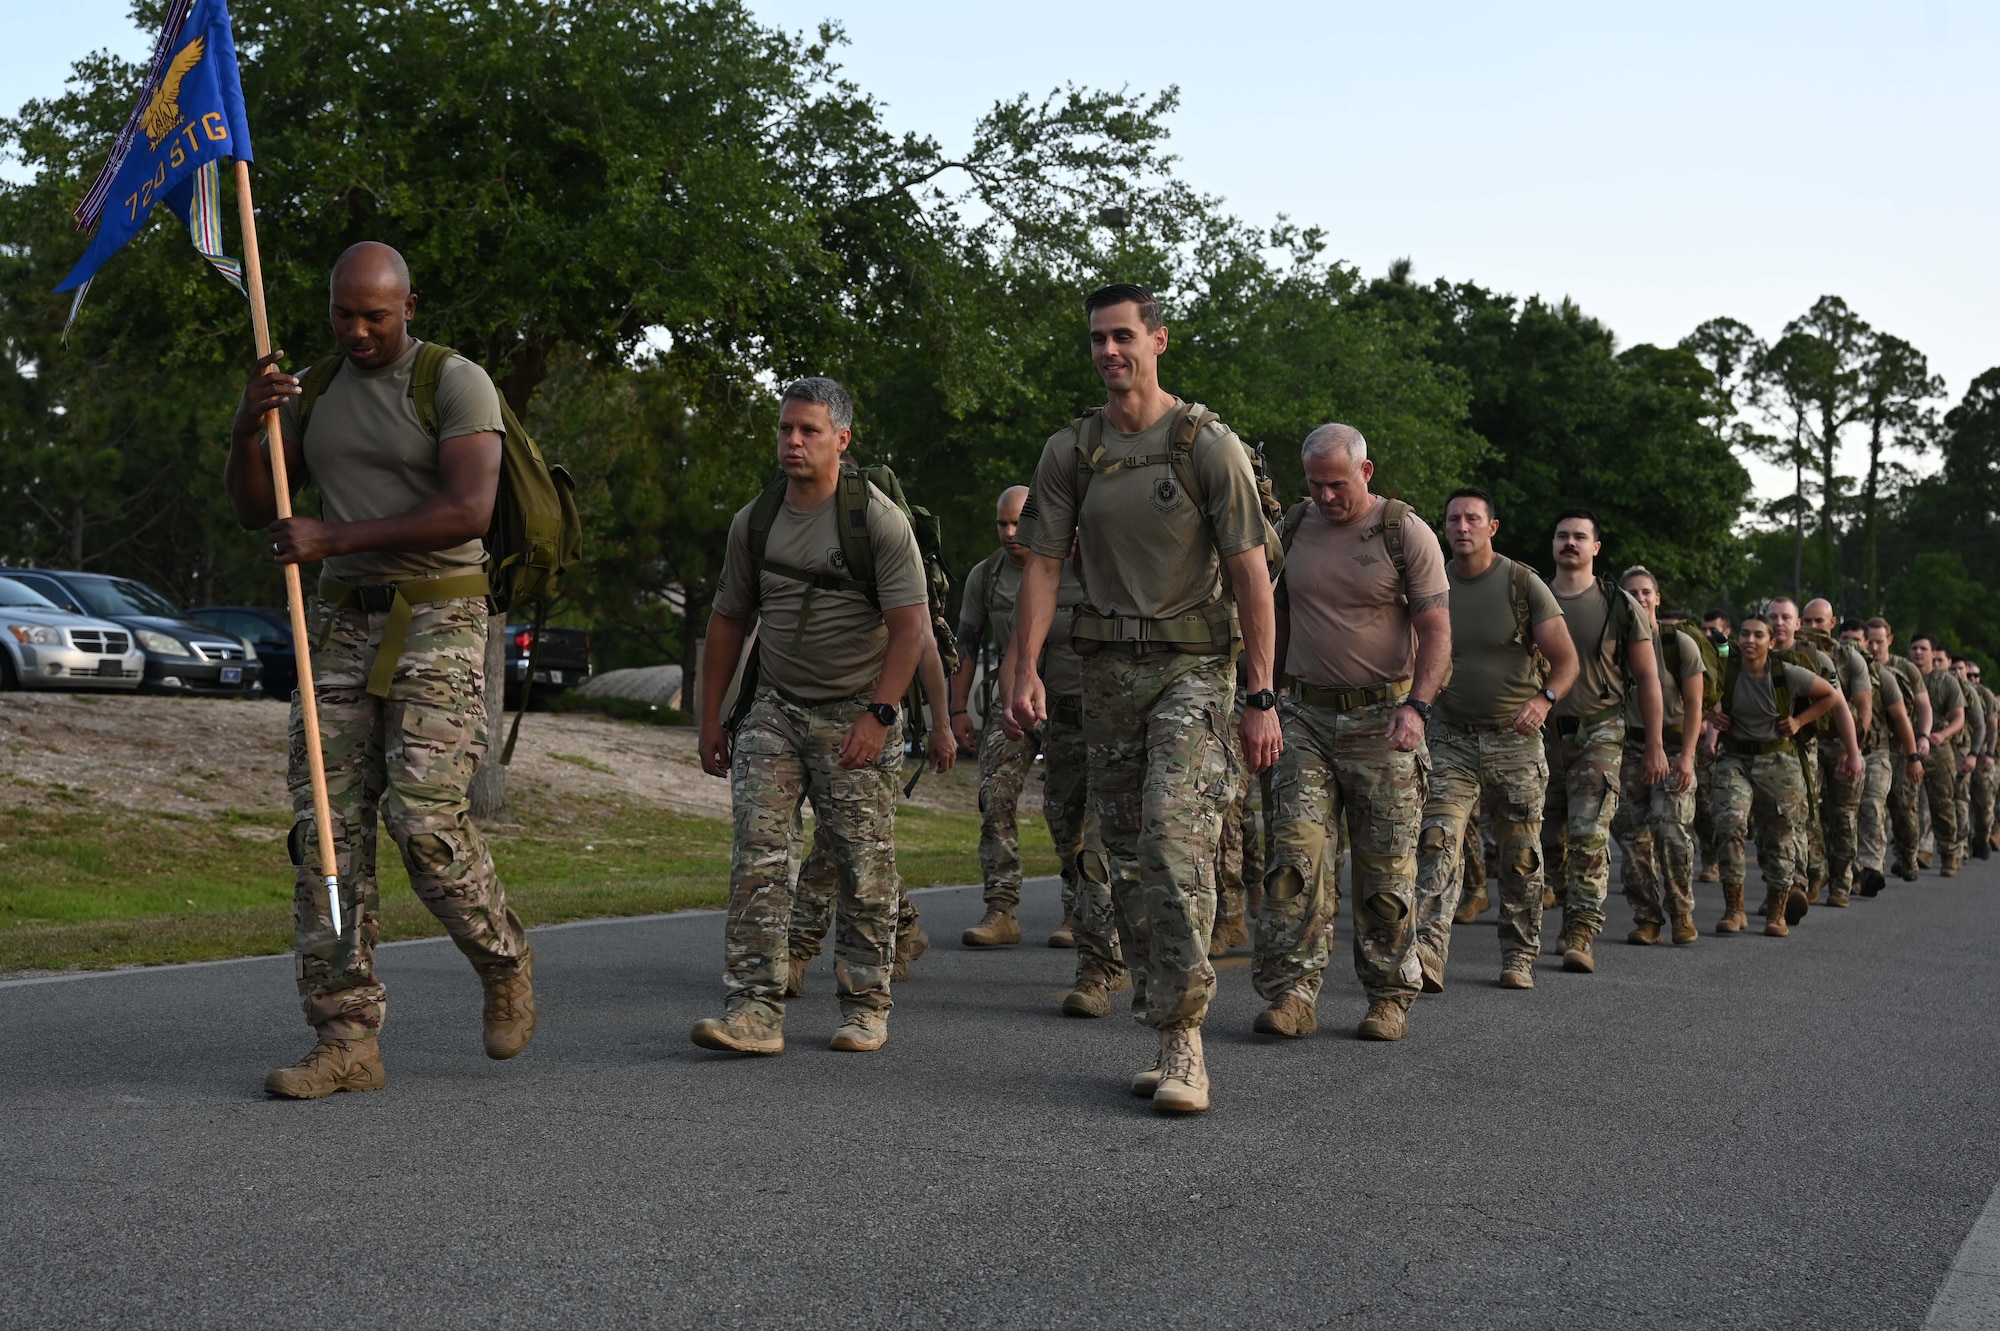 Members of the 24th Special Operations Wing begin their ruck march during the 2022 Run to Honor 5K Run/Ruck at Hurlburt Field, Florida May 13, 2022. Air Force Special Operations Command has lost 380 members, both active duty and civilian, since the creation of the command, and this event is a tribute to AFSOC Airmen who have made the ultimate sacrifice in service to their country. (U.S. Air Force photo by Staff Sgt. Brandon Esau)